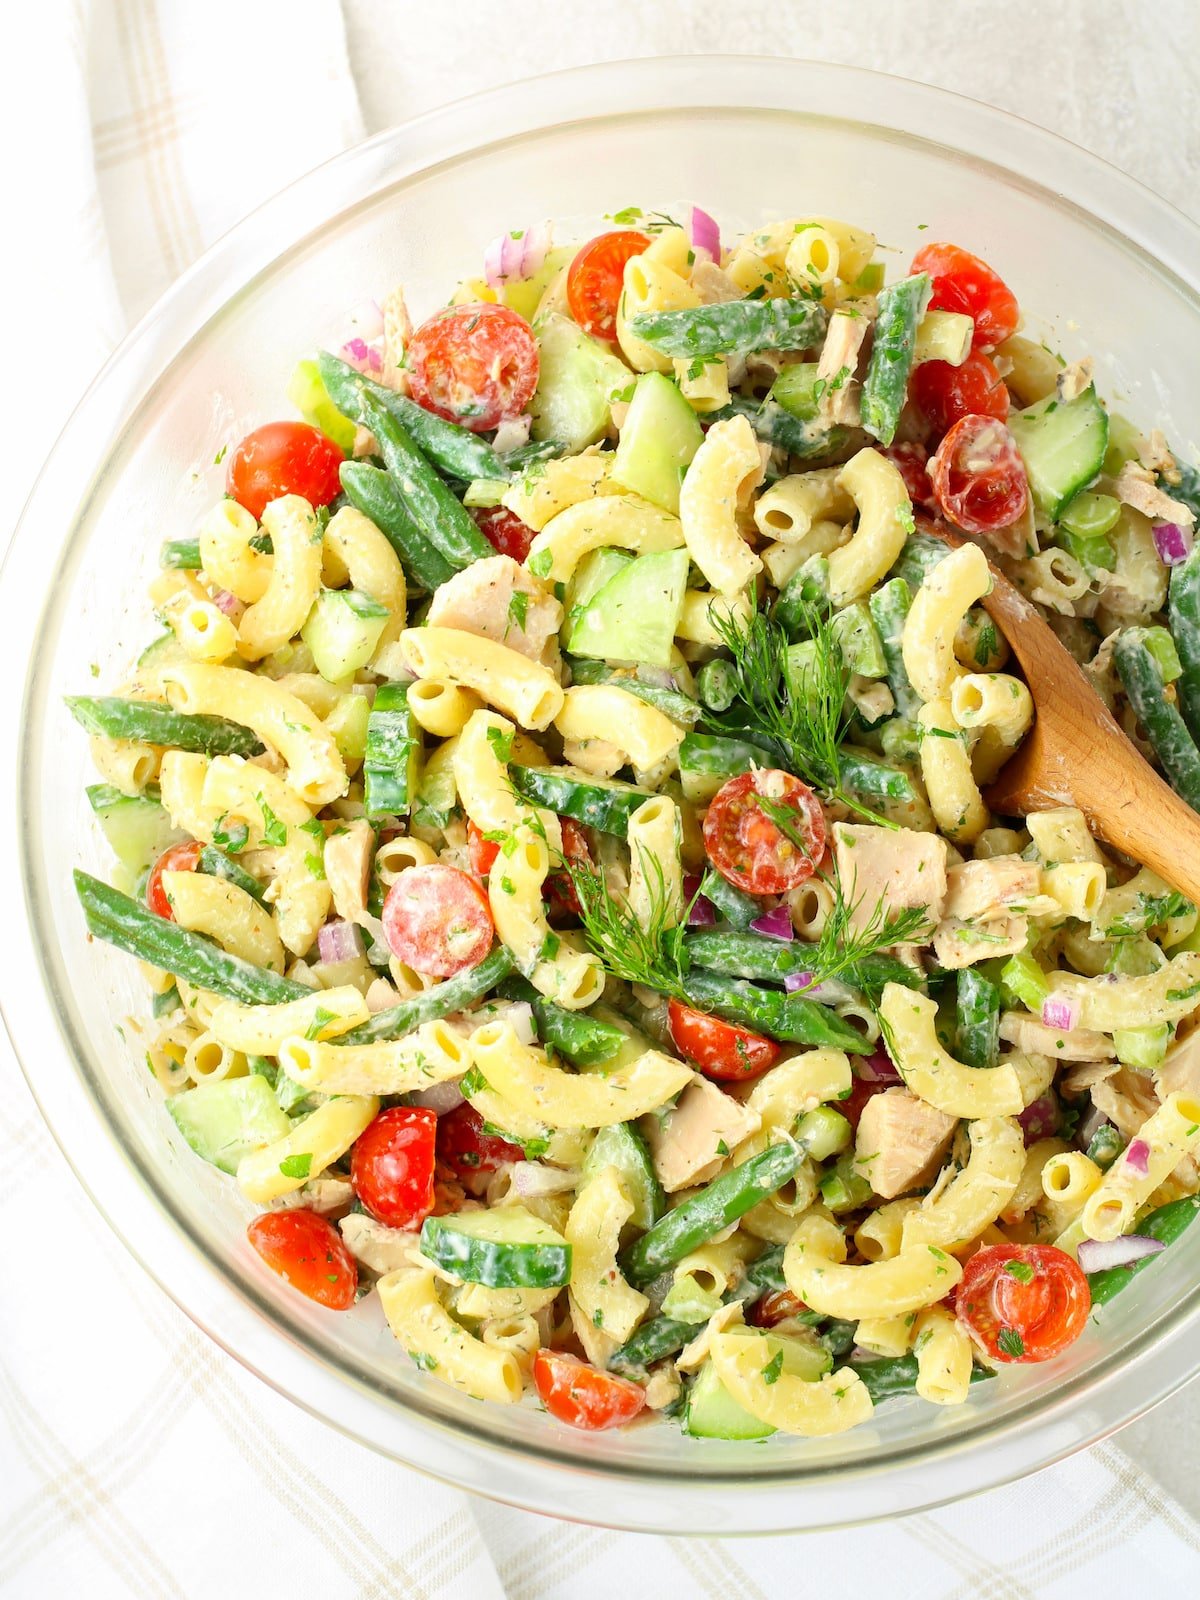 Large glass mixing bowl with pasta, green beans and tomatoes.